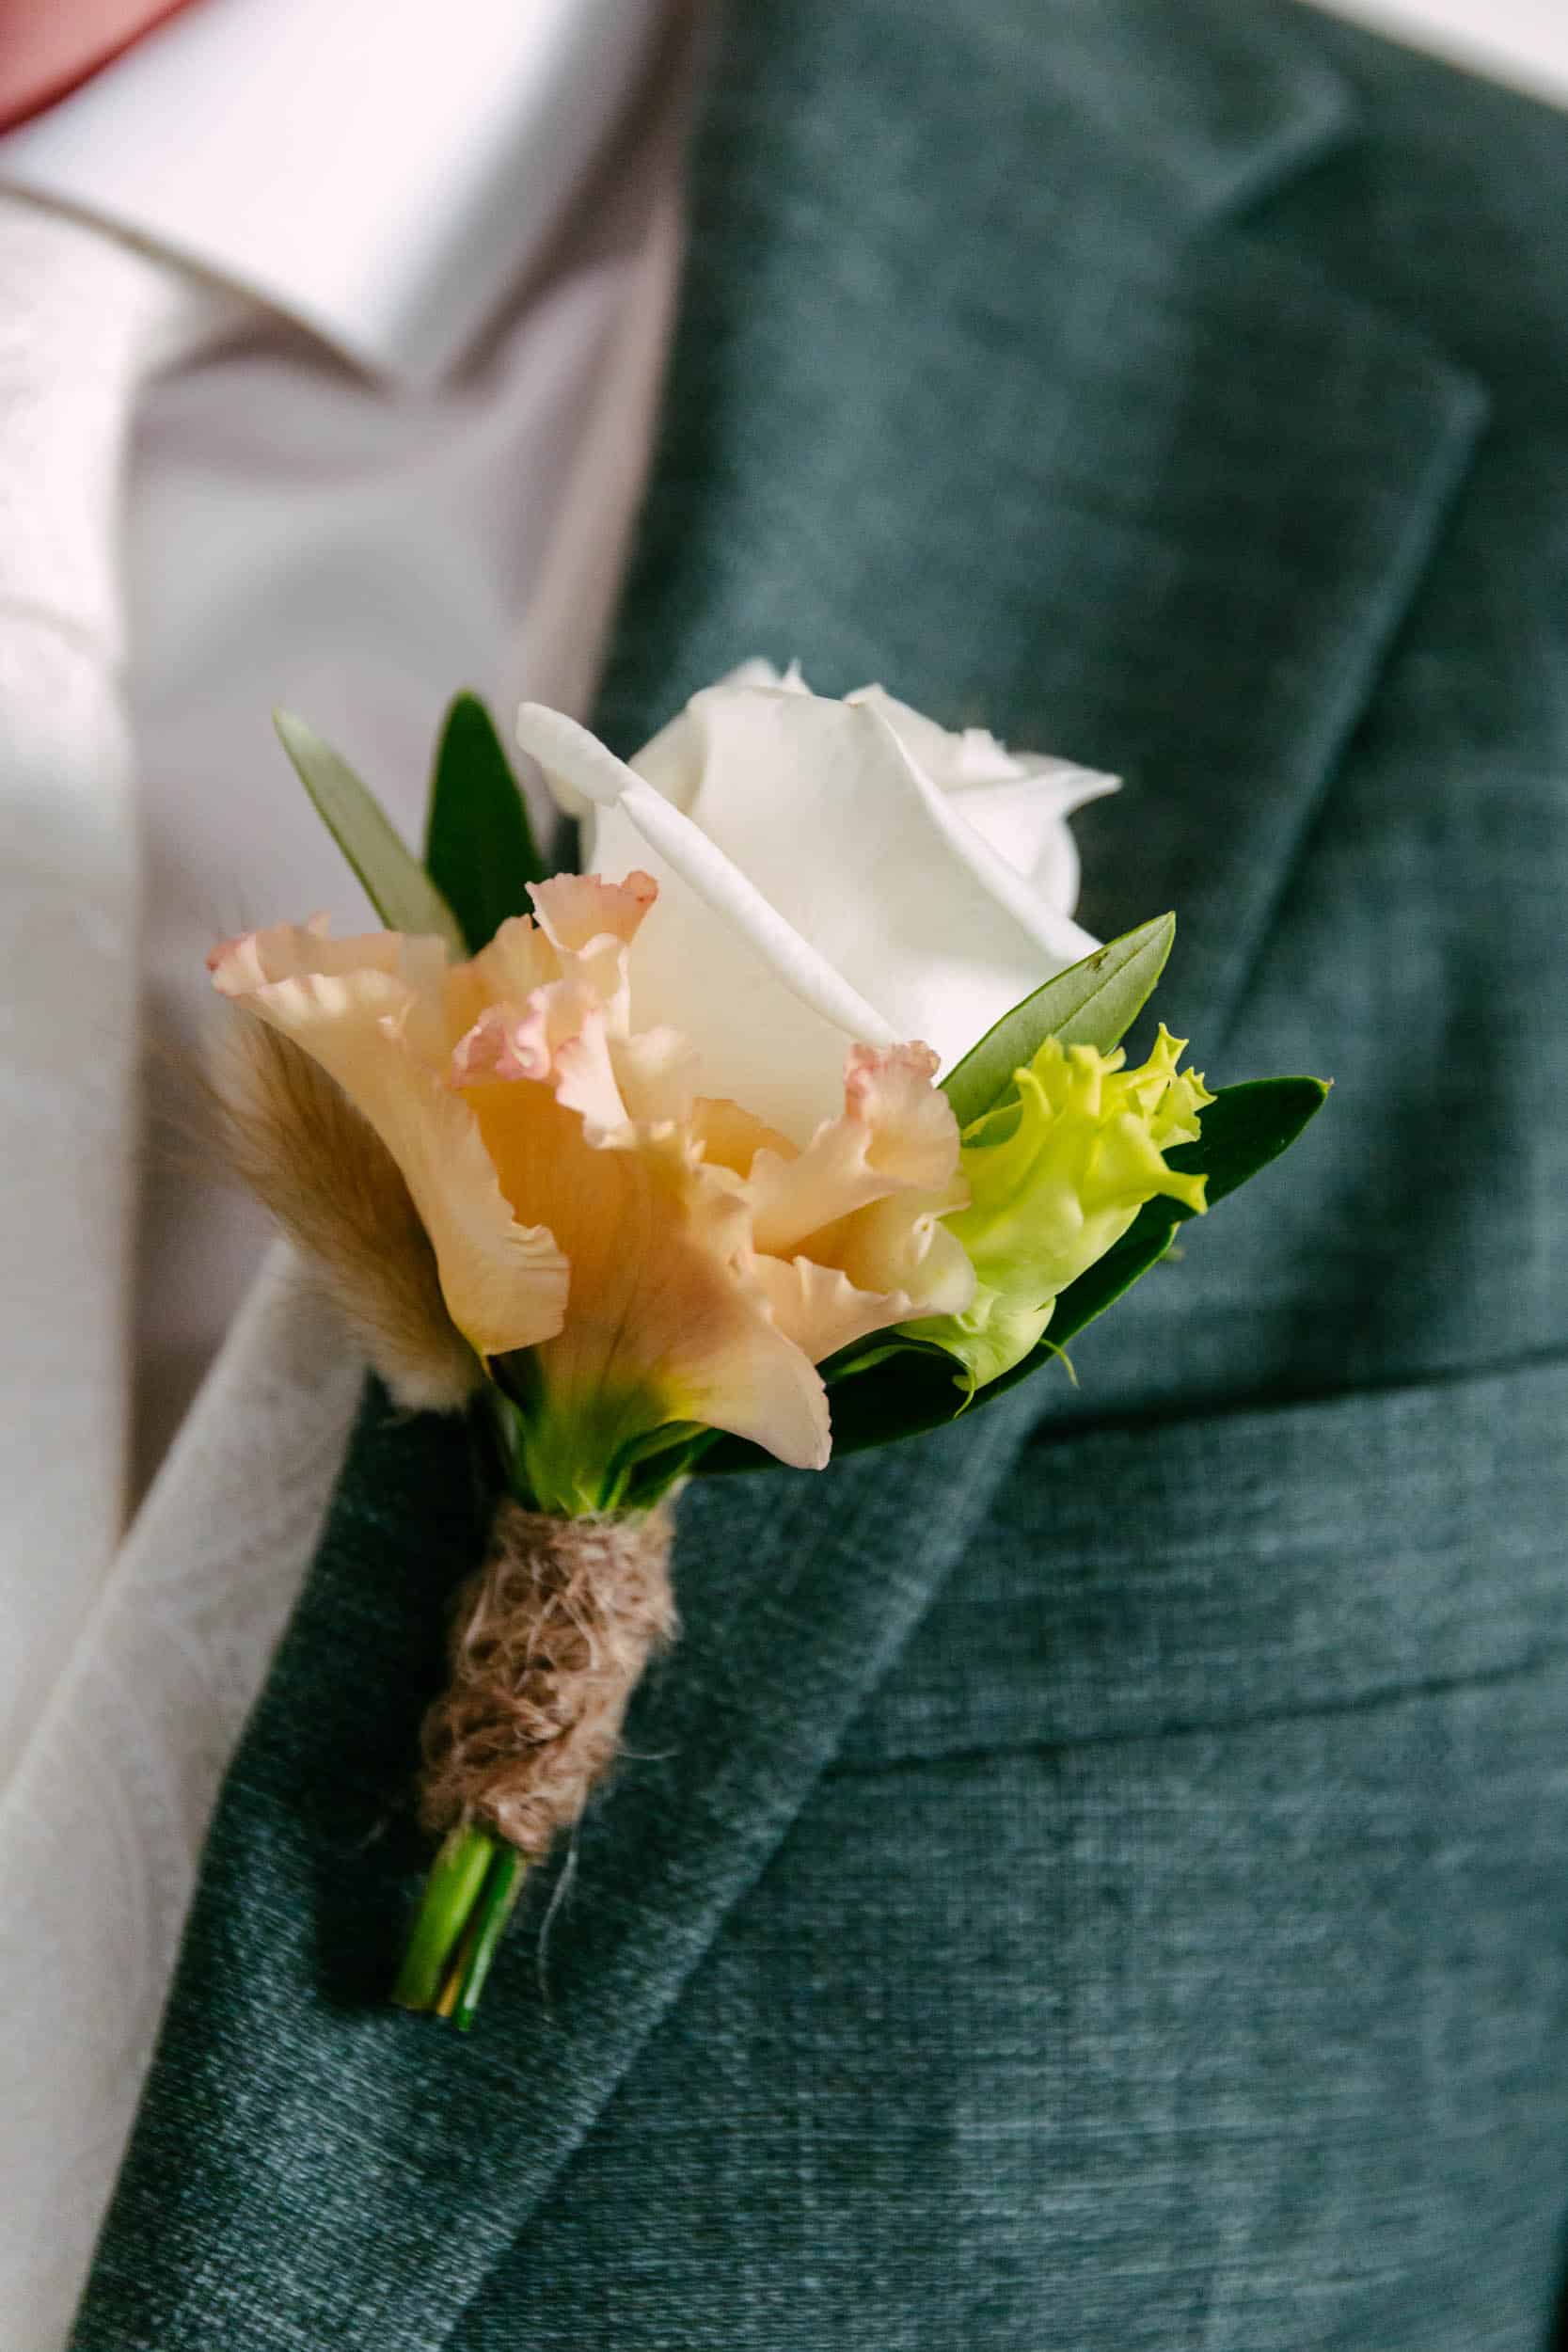 Corsage with a pink rose and plaster powder to the groom.